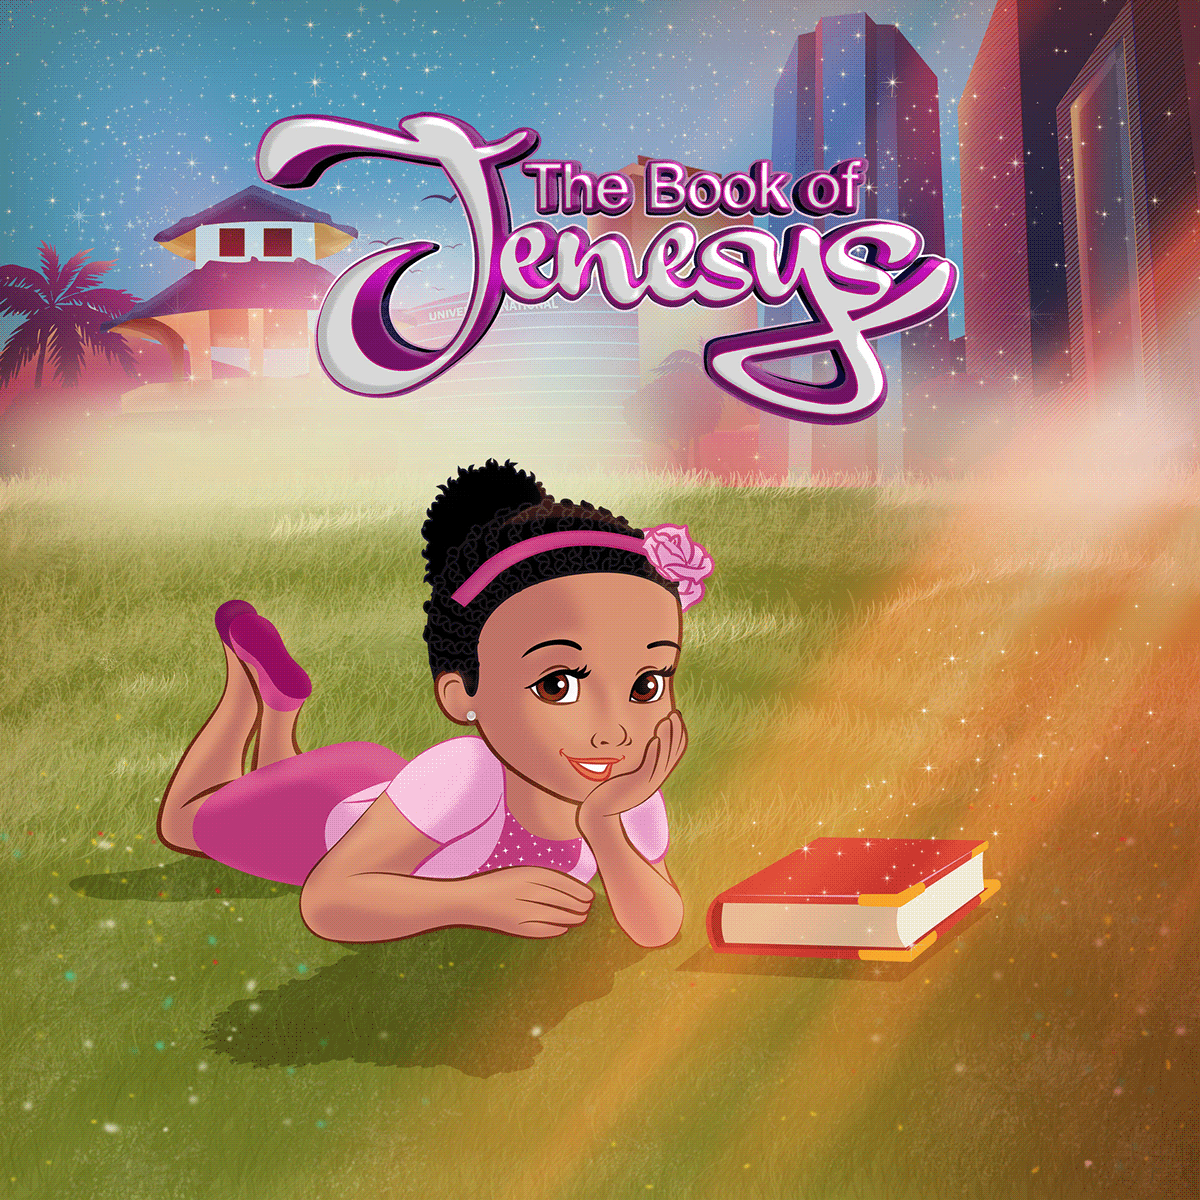 The Book of Jenesys is a Christian series founded and inspired by the teachings of the Holy Bible. 